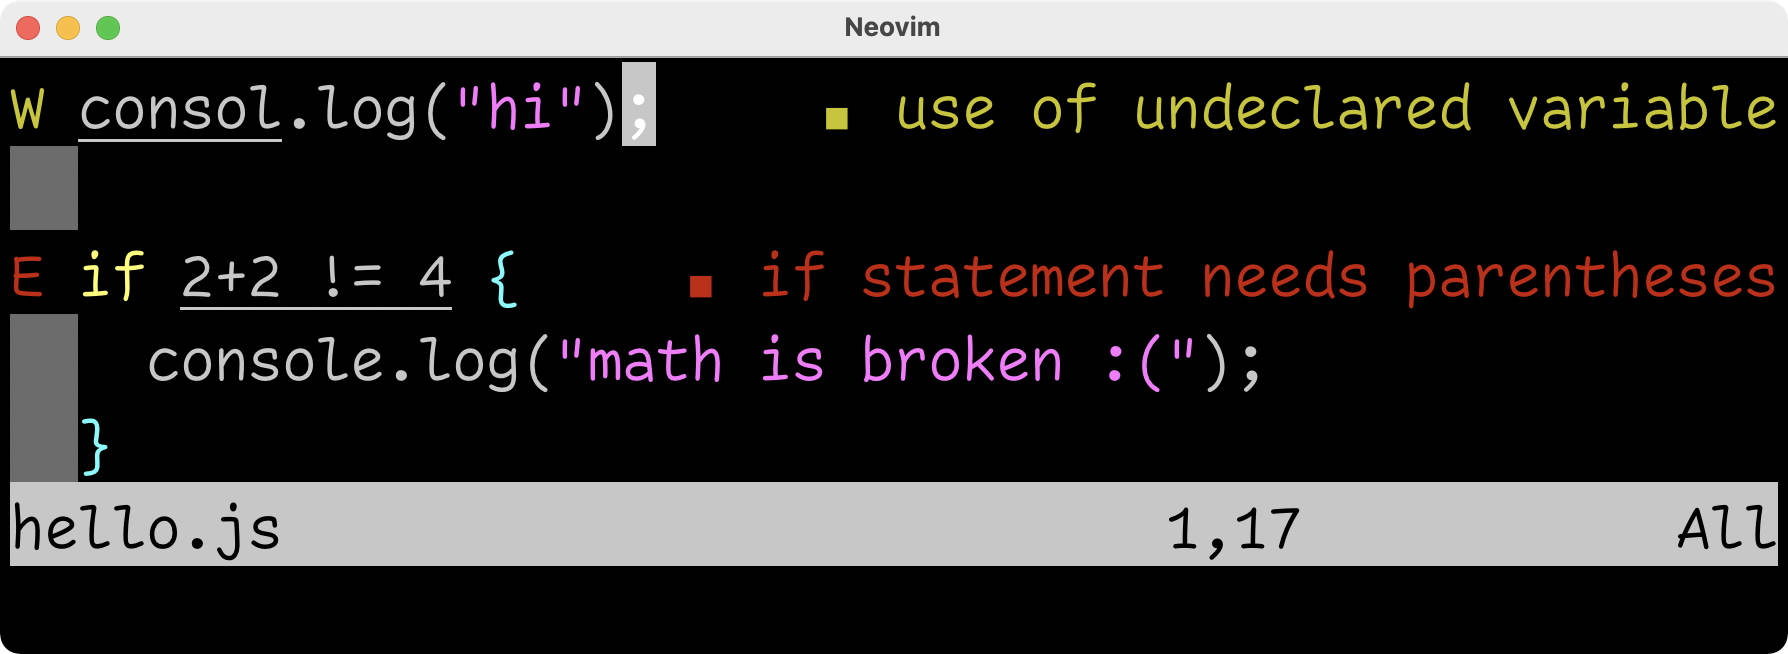 Neovim with quick-lint-js running on macOS in iTerm 2